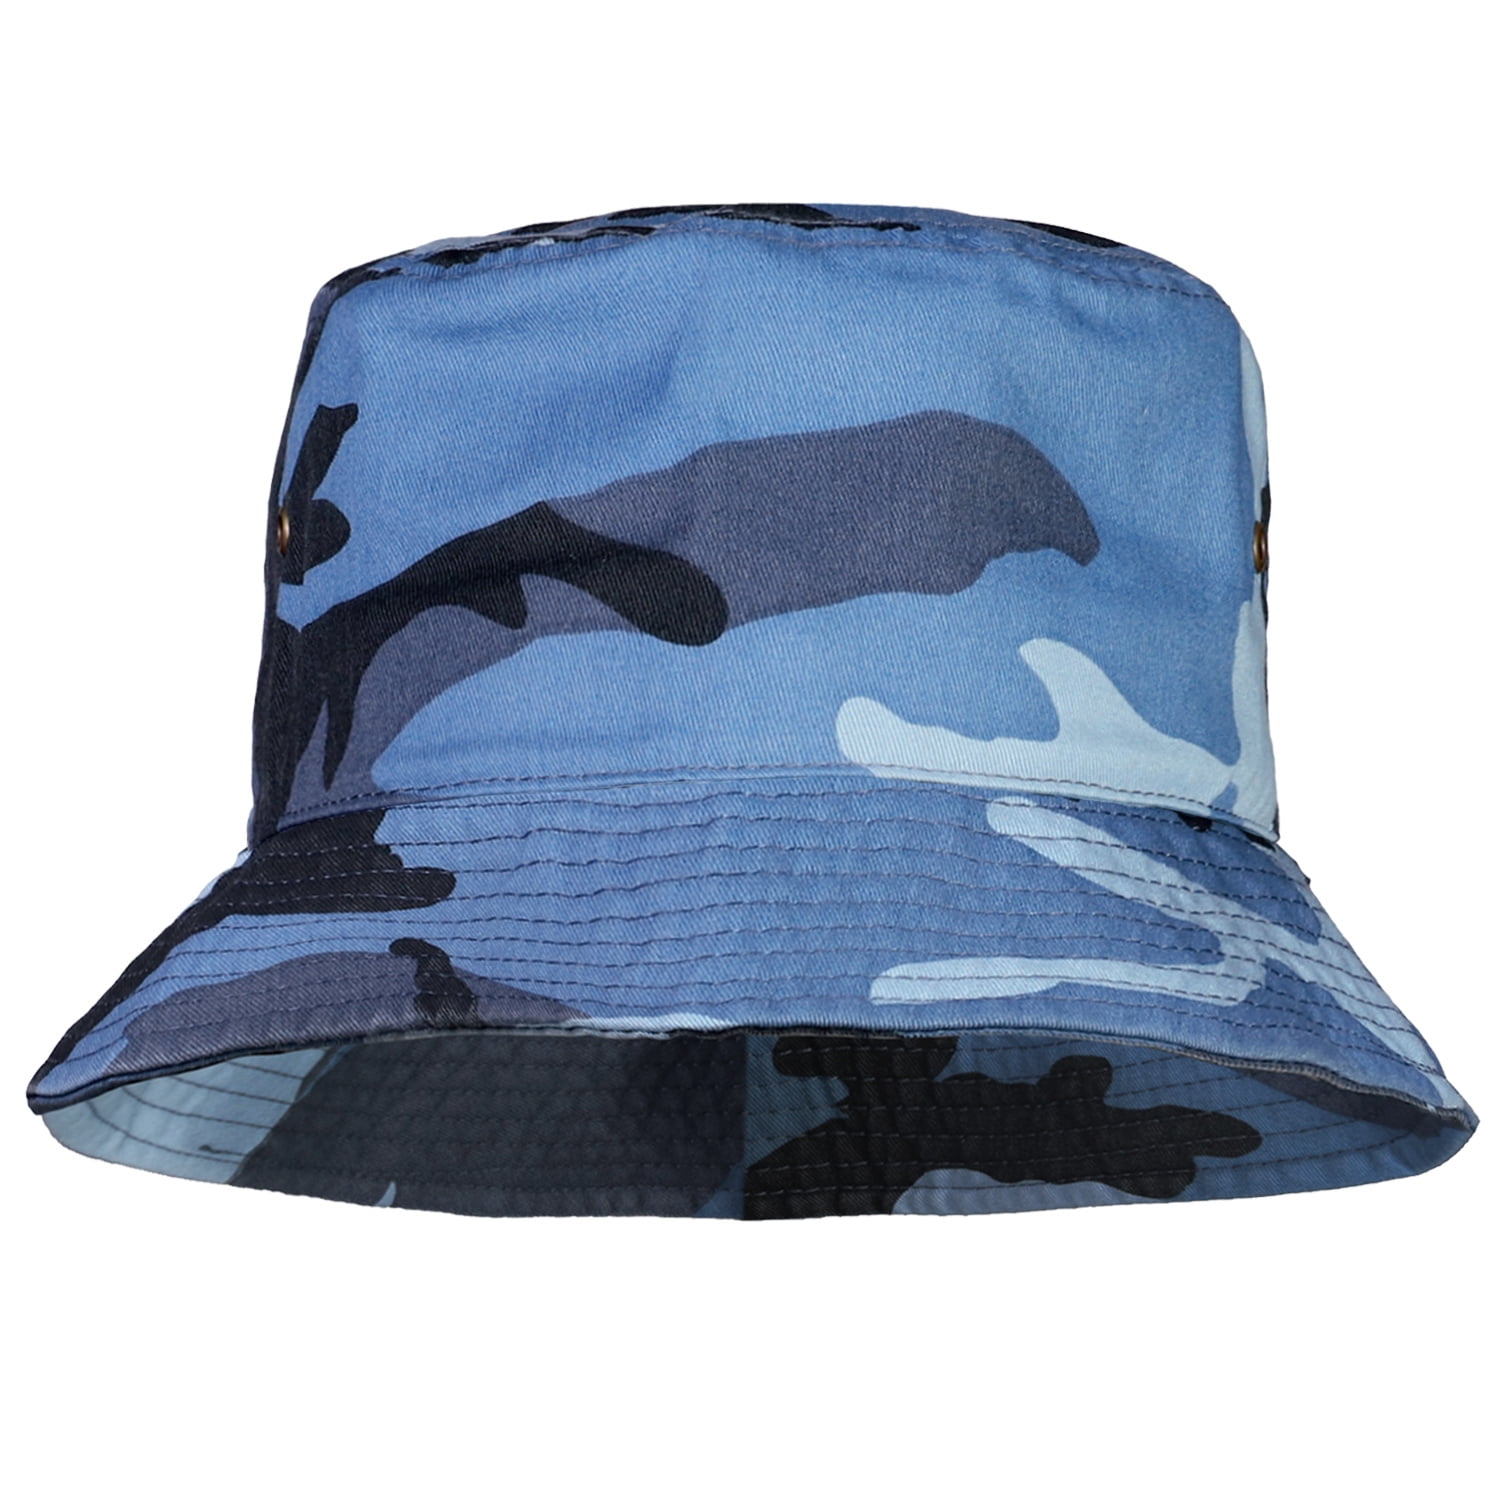 Bucket Hat for Men Women Unisex 100% Cotton Packable Foldable Summer Travel  Beach Outdoor Fishing Hat - SM Blue Camouflage